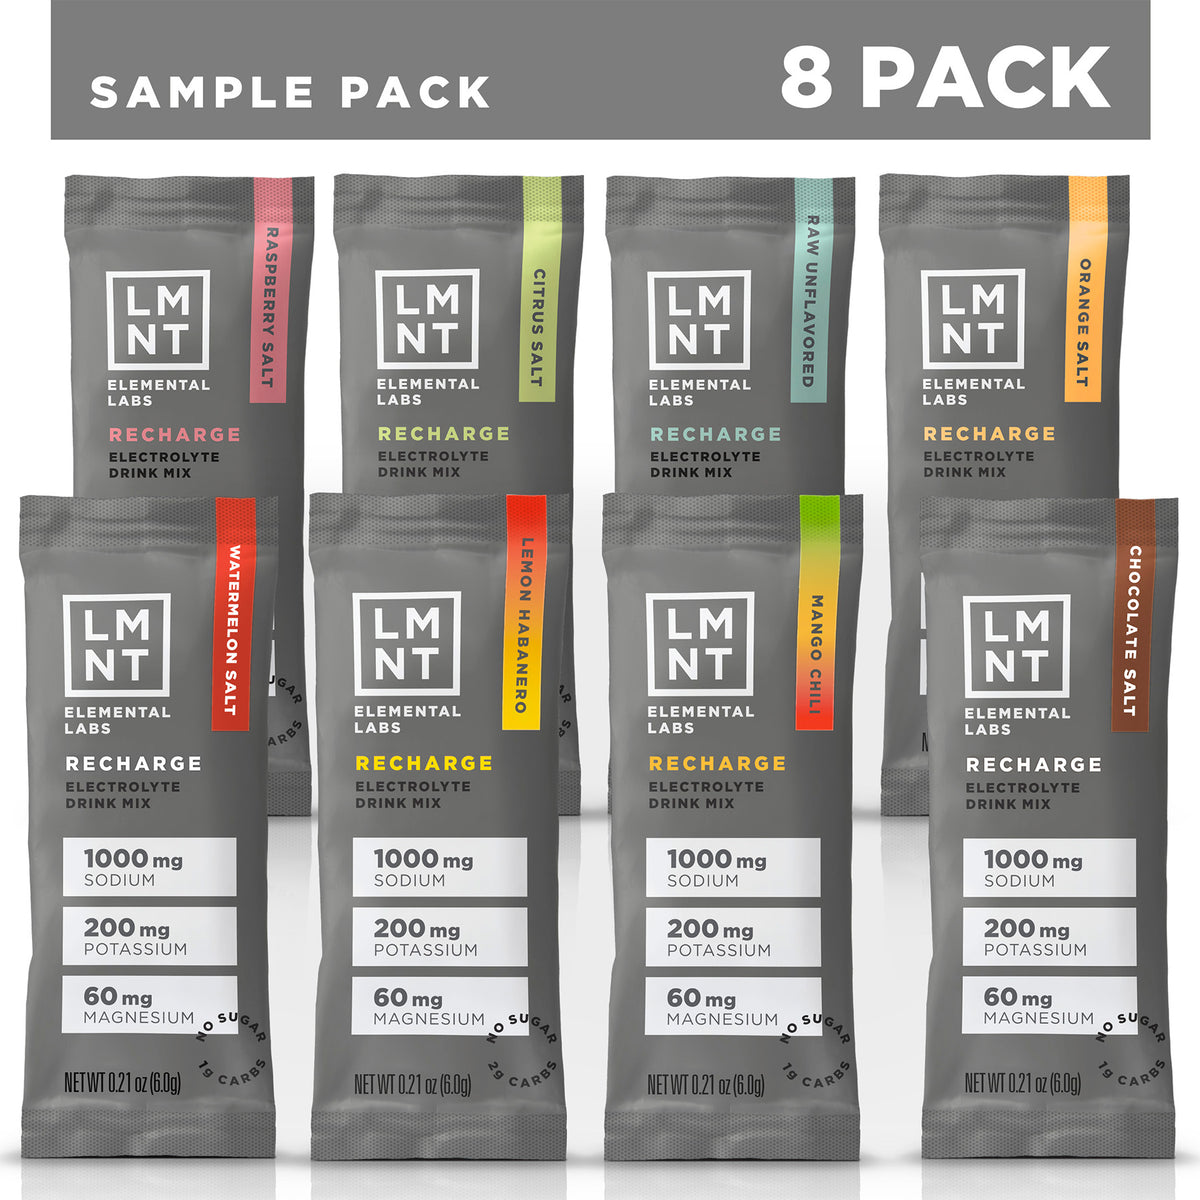 8 count sample pack of LMNT Elemental Labs Recharge Electrolyte Drink Mix